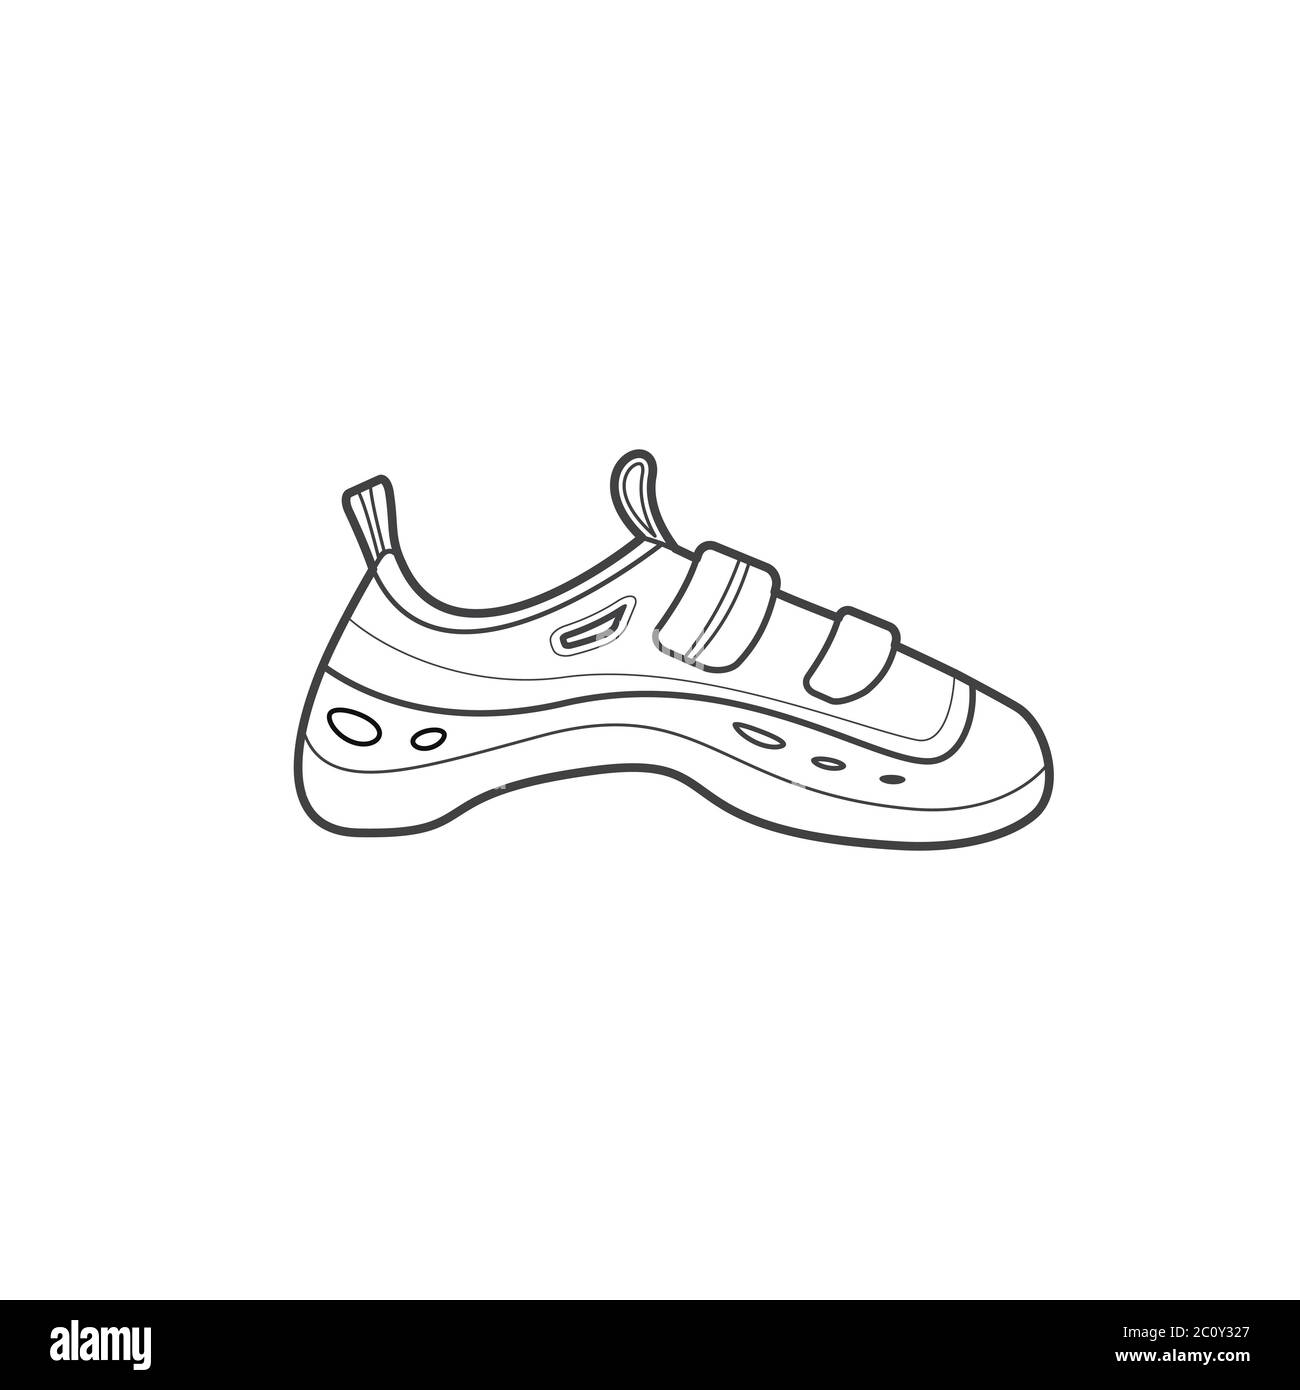 outline alpinism equipment shoes icon illustration Stock Photo